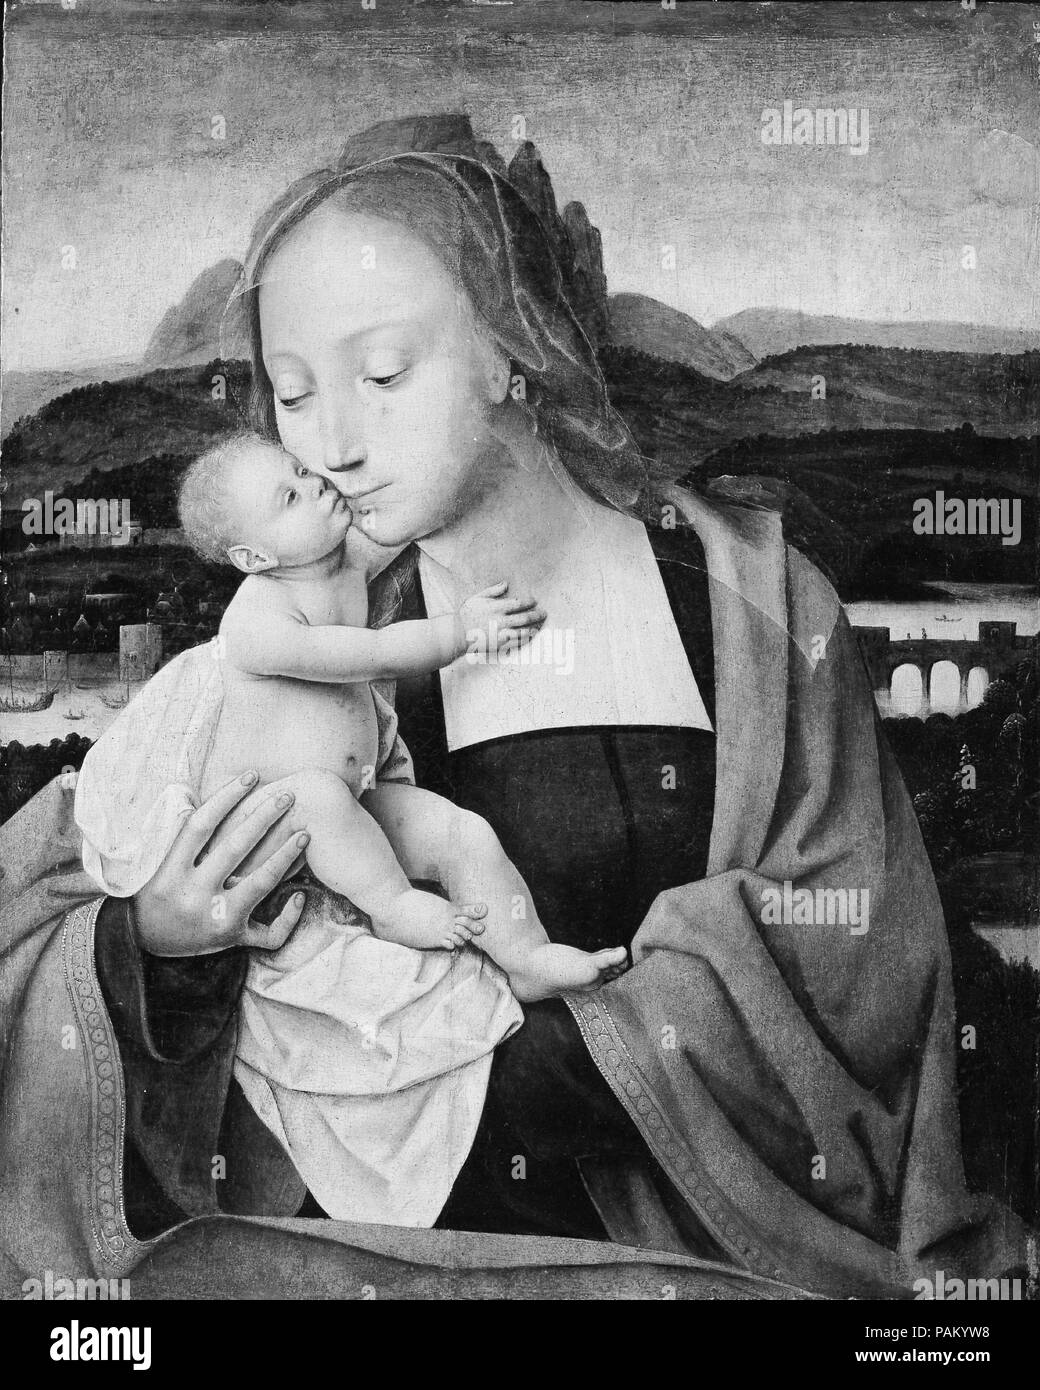 Virgin and Child. Artist: Master of the Mansi Magdalen (Netherlandish, active first quarter 16th century). Dimensions: 19 1/8 x 15 1/4 in. (48.6 x 38.7 cm). Museum: Metropolitan Museum of Art, New York, USA. Stock Photo